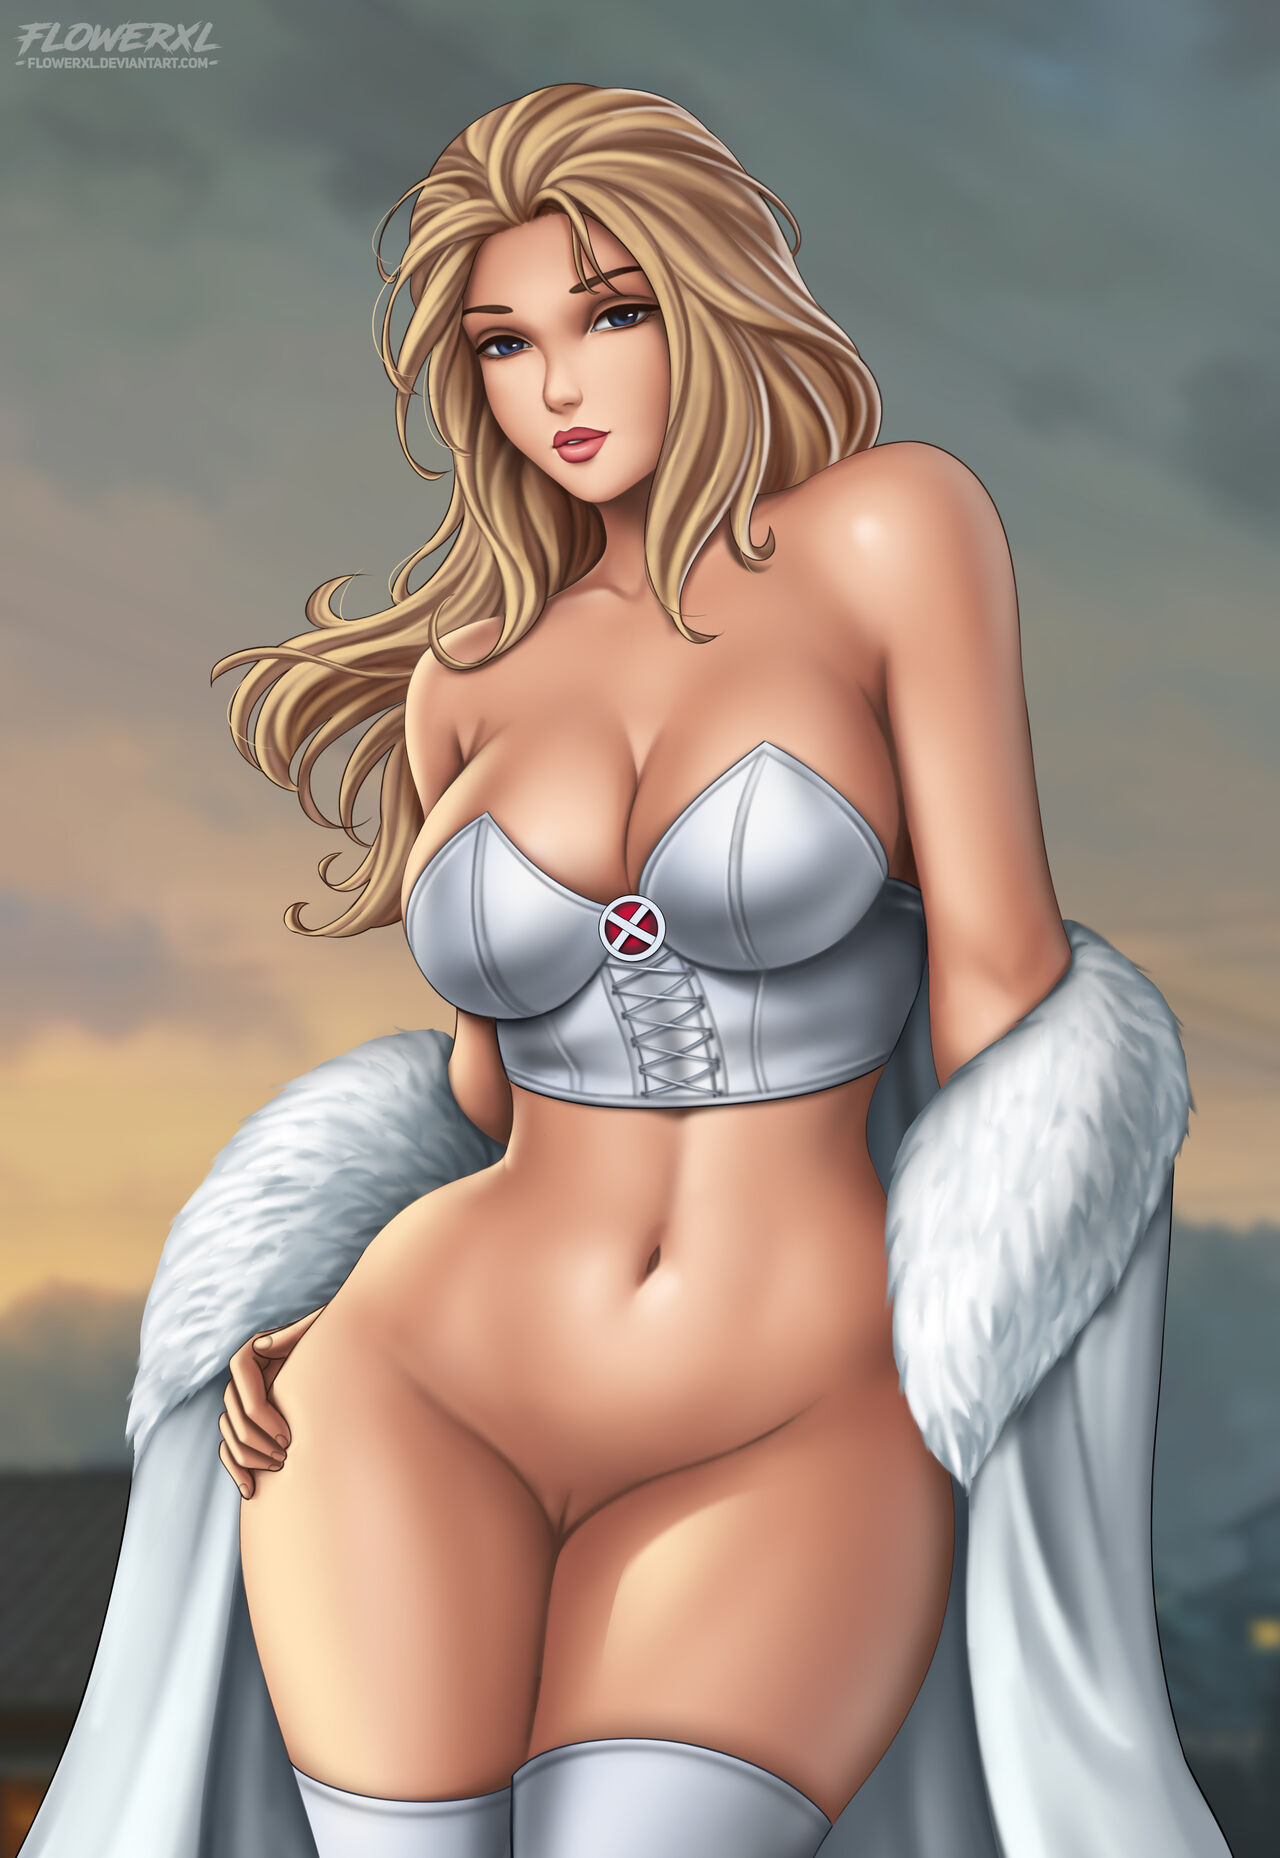 1girl alternate_version_available artist_logo big_breasts black_eyebrows blonde_female blonde_hair blue_eyes breasts coat comic_book_character detailed_background emma_frost female_only flowerxl hand_on_thigh long_hair marvel marvel_comics no_panties pale-skinned_female pussy thighs white_high_heels white_queen white_topwear x-men